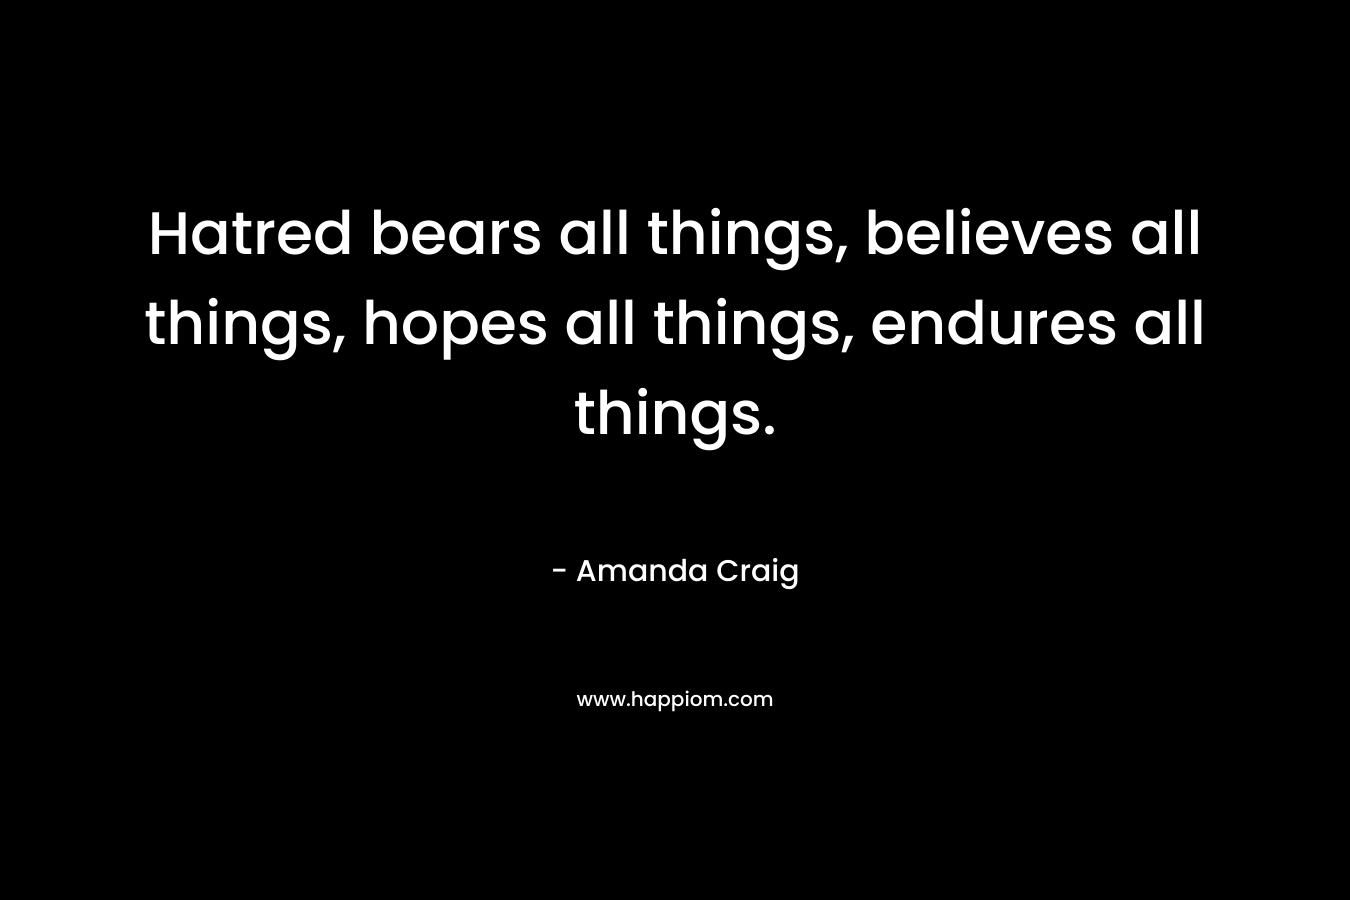 Hatred bears all things, believes all things, hopes all things, endures all things. – Amanda Craig